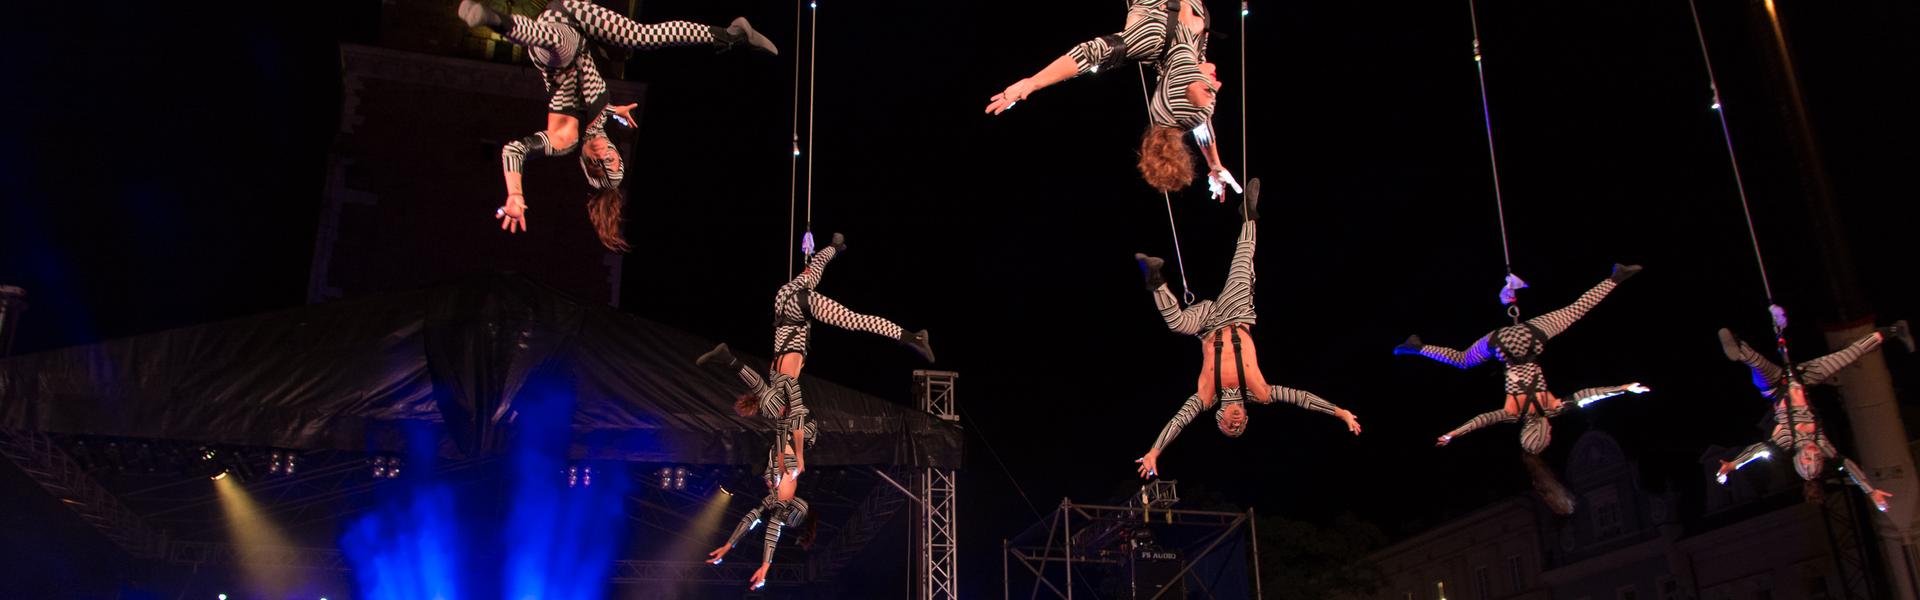 Costumed actors hanging upside down on ropes above a crowded audience during a theatre festival. It is dark, next to it there is a blue illuminated stage.